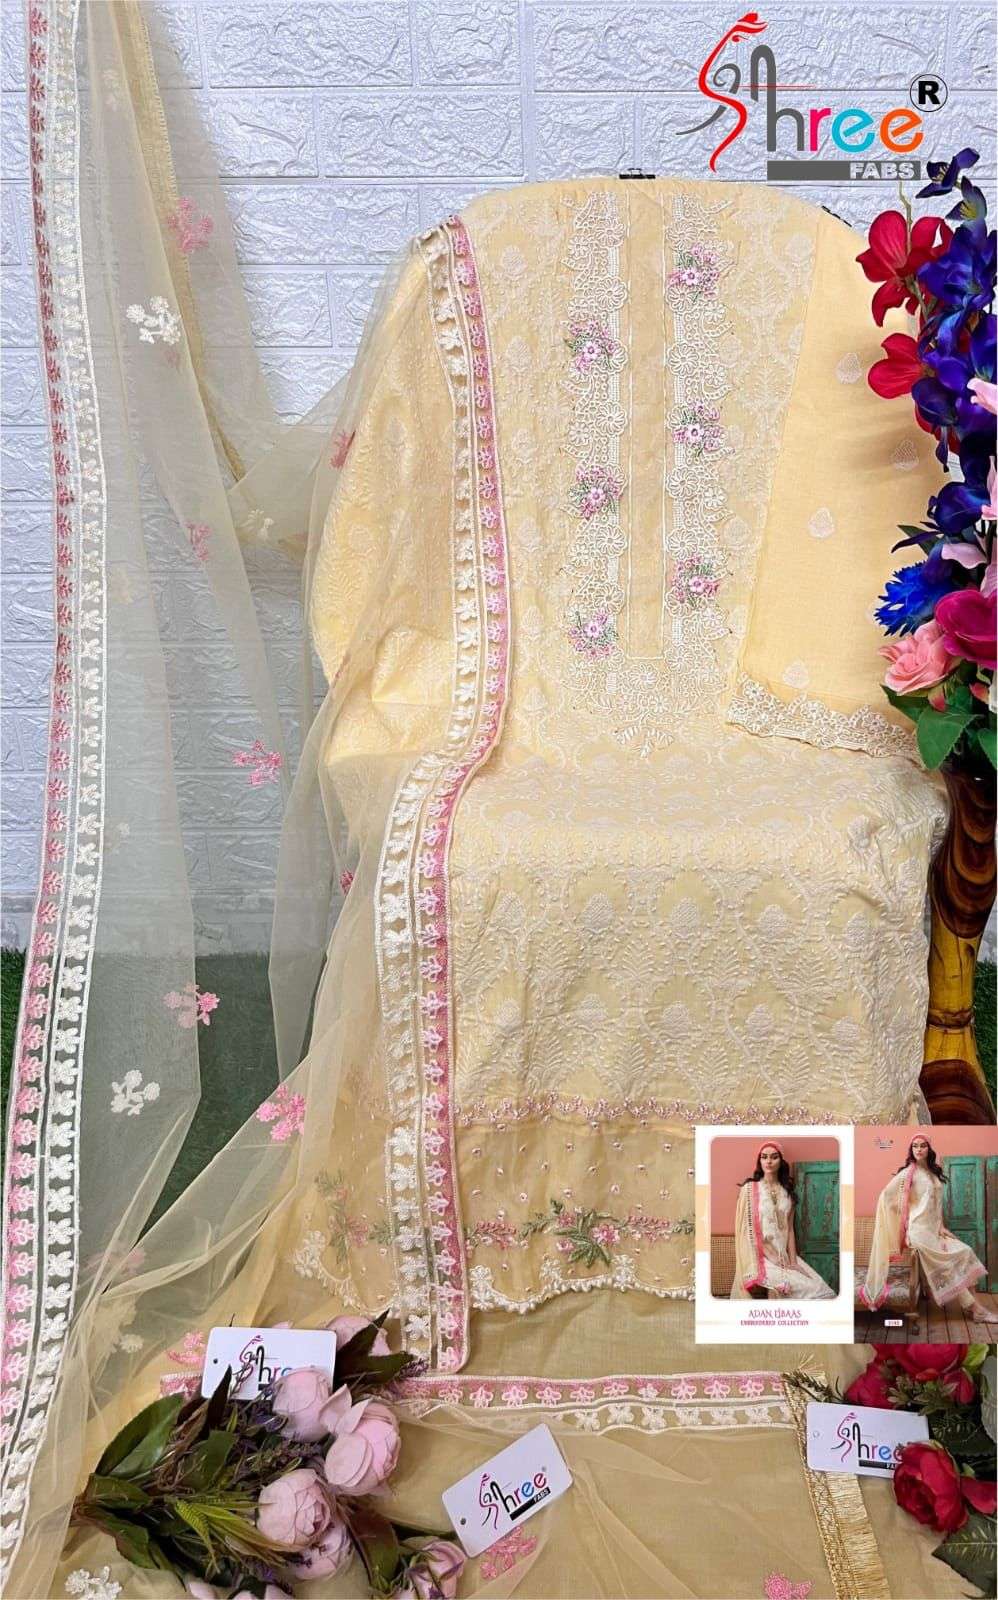 SHREE FABS ADAN LIBAAS EMBROIDERED COLLECTION